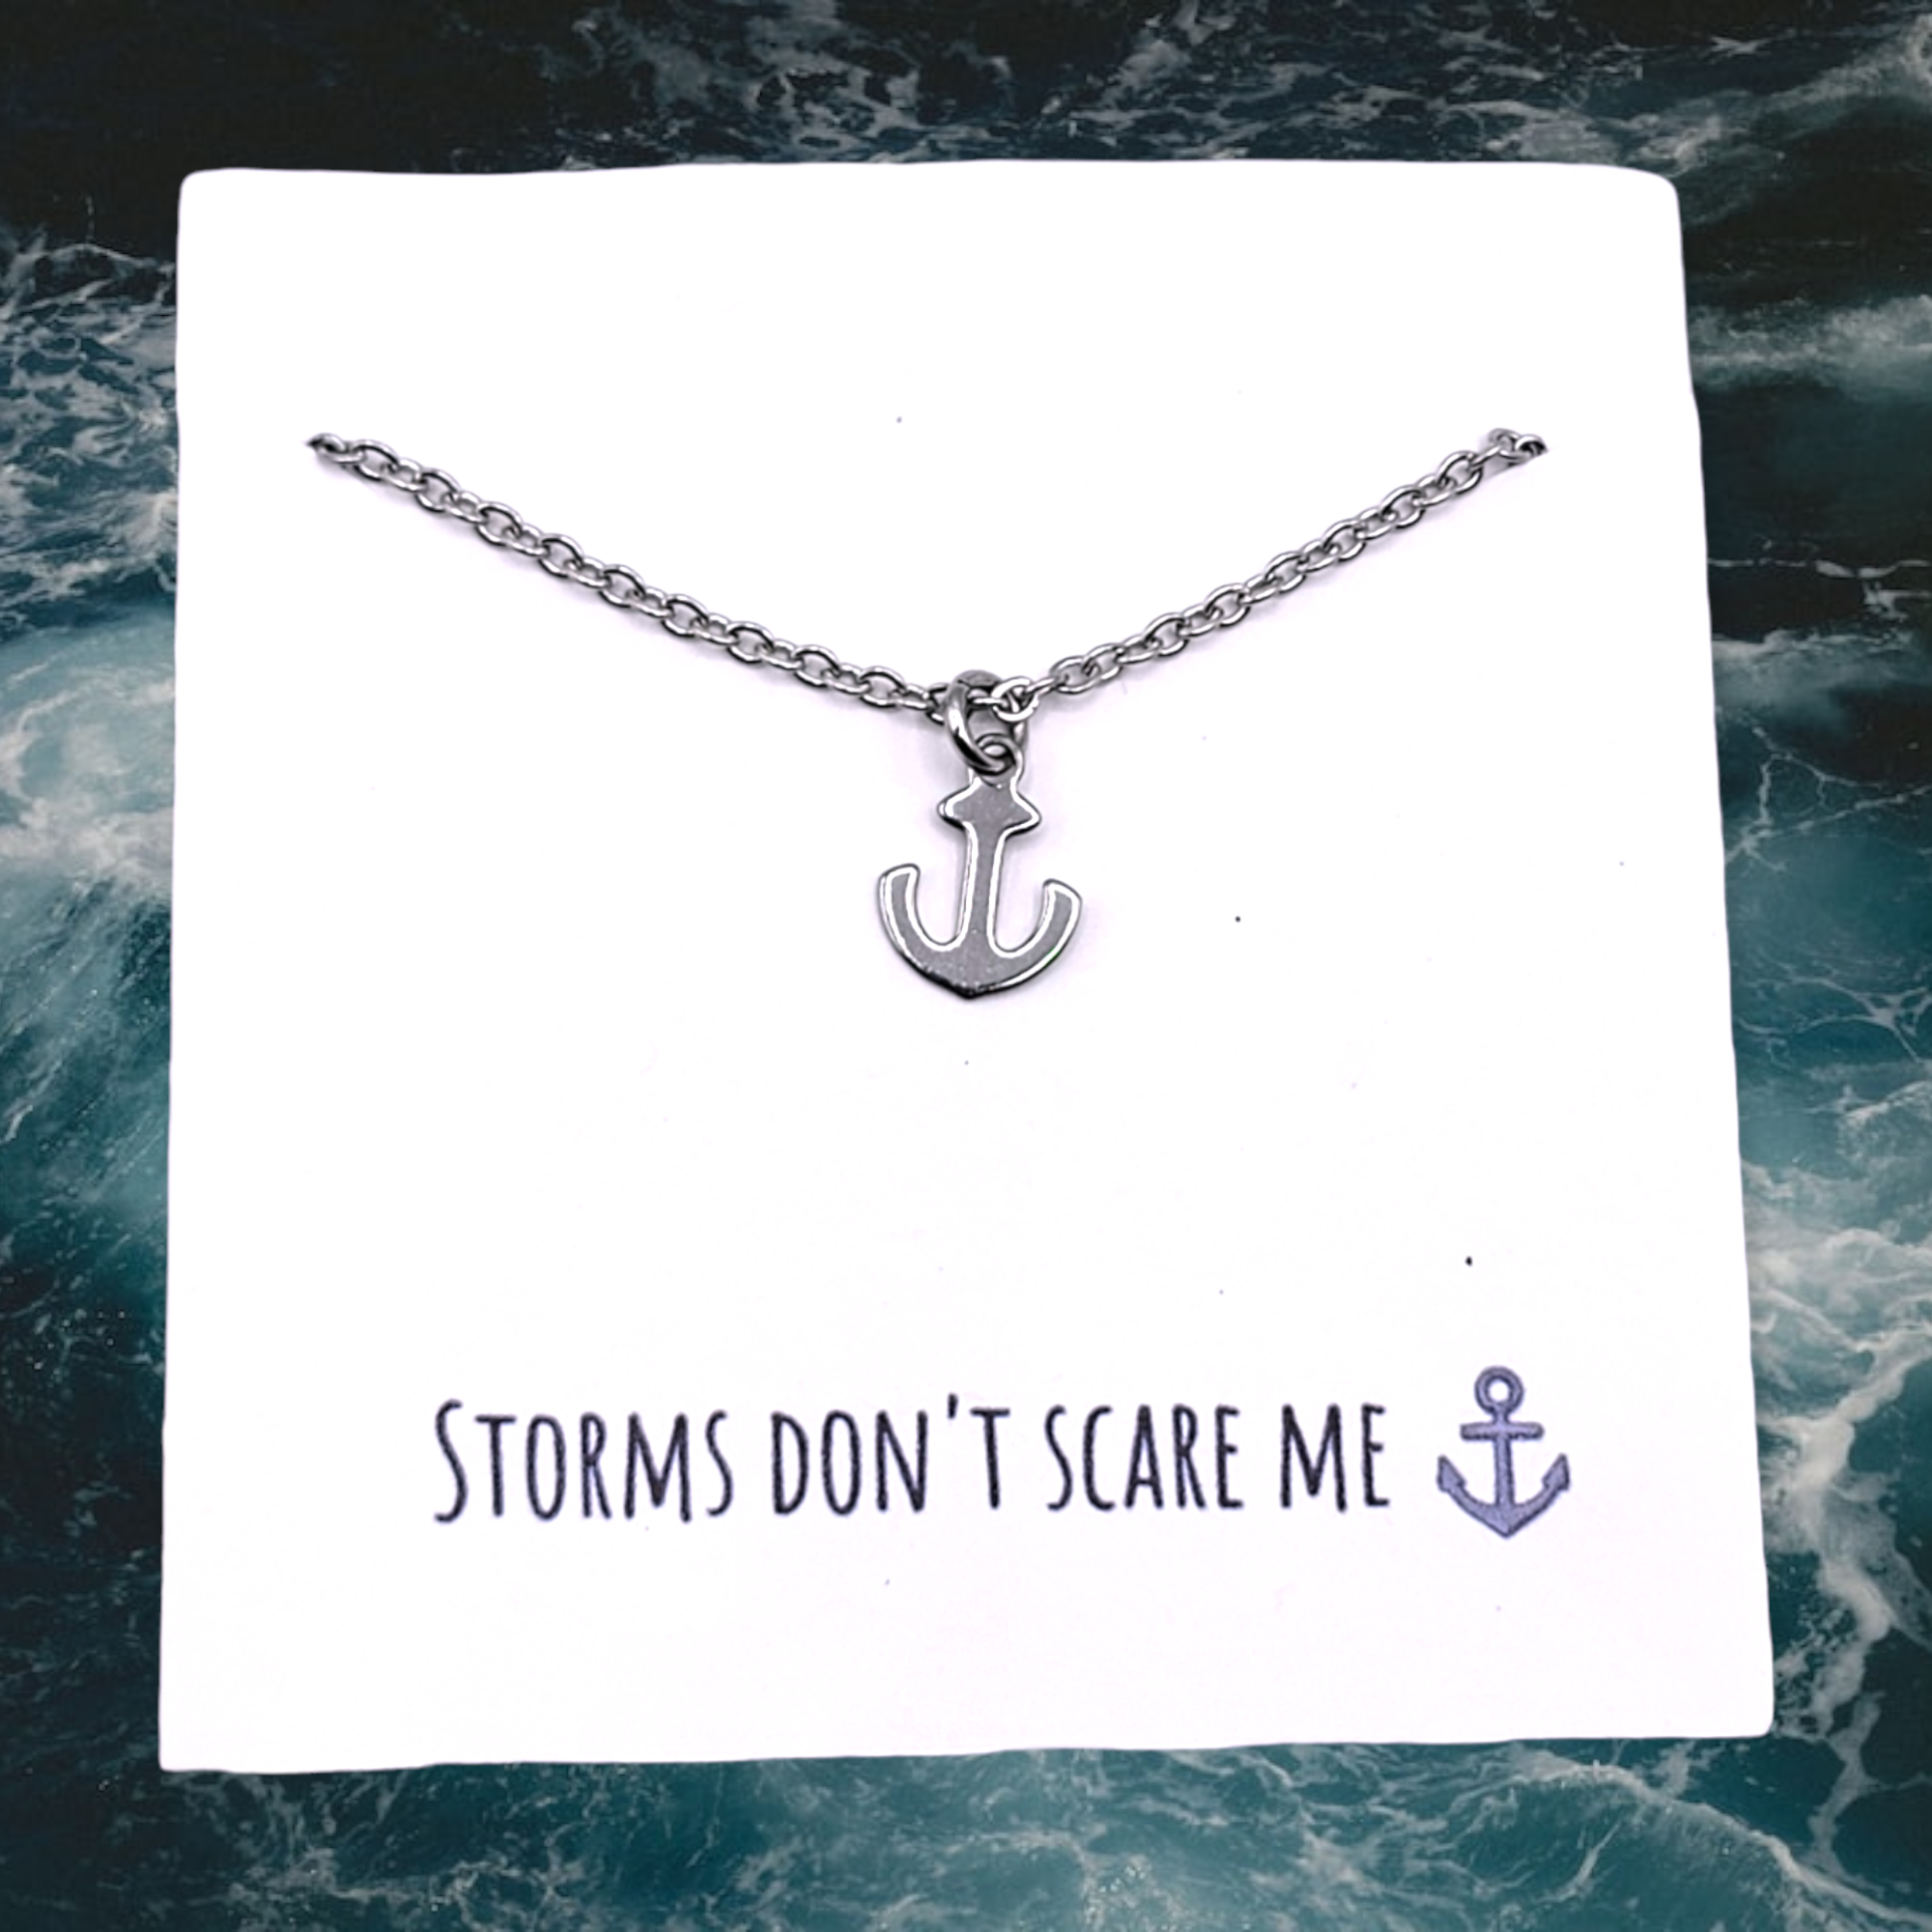 Anchor necklace -"Storms don't scare me" - Travelers Trade Post